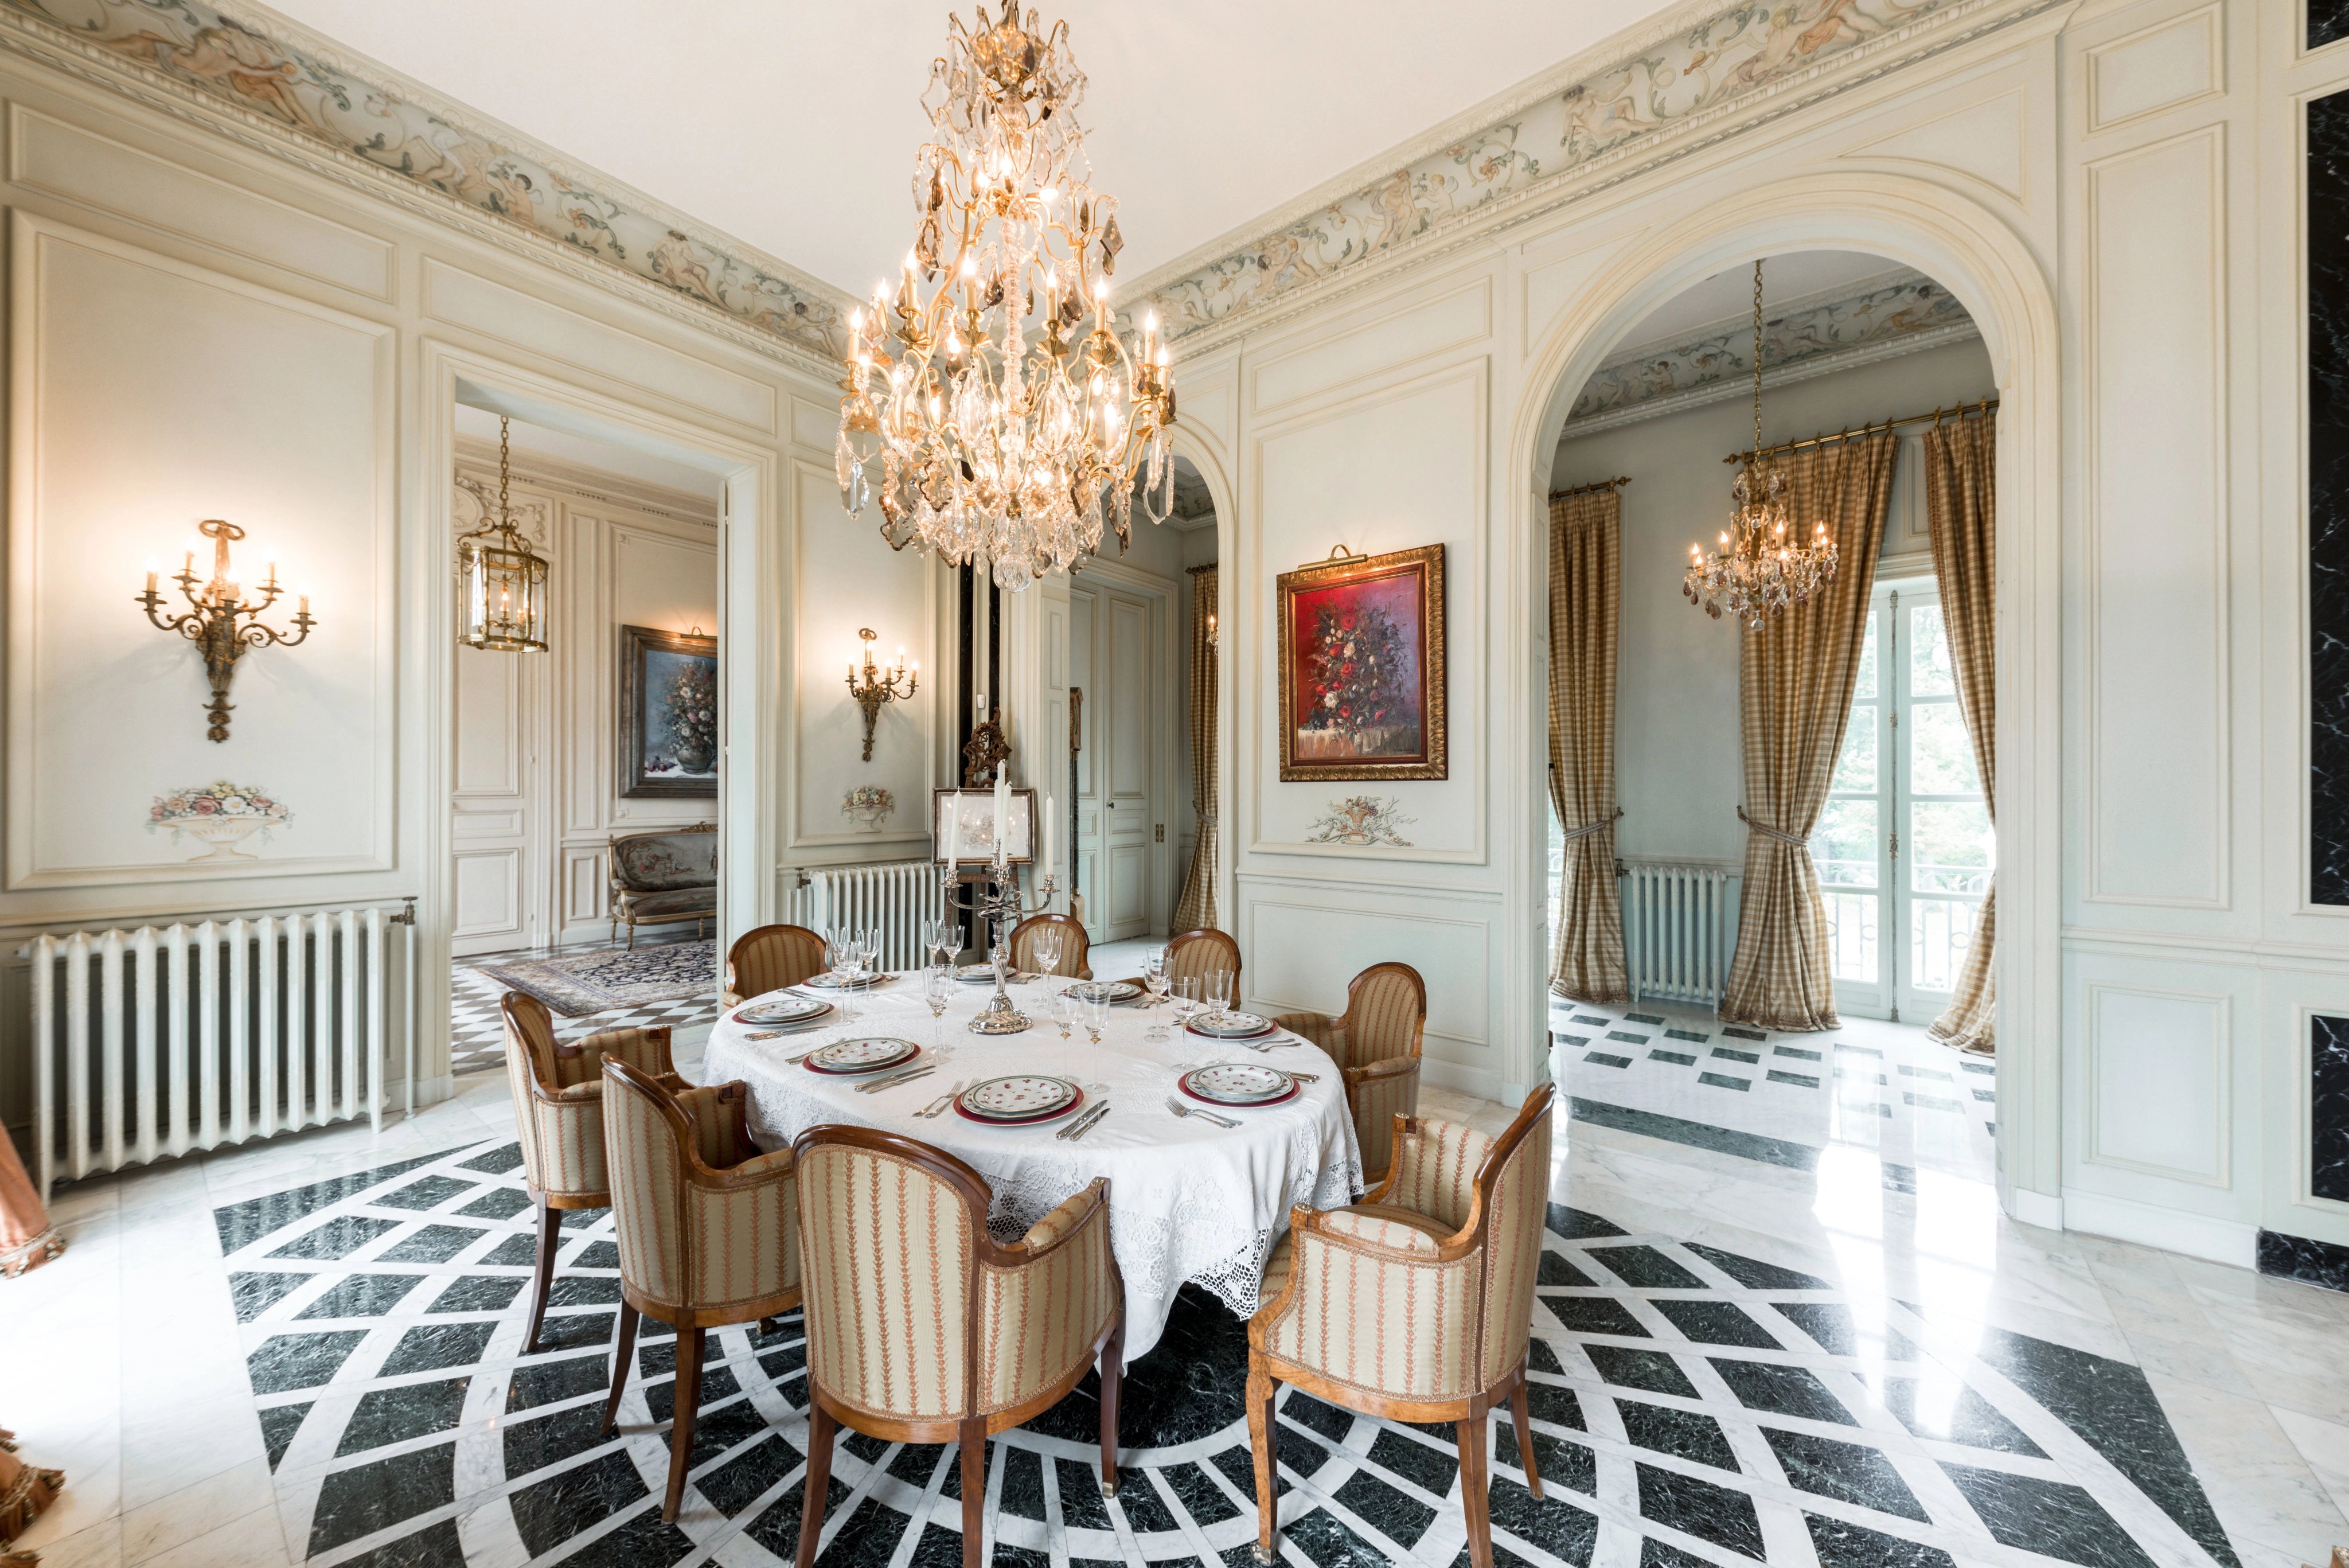 A sublime Palais inspired by Grand Trianon Palace, 20 min from Paris_1563